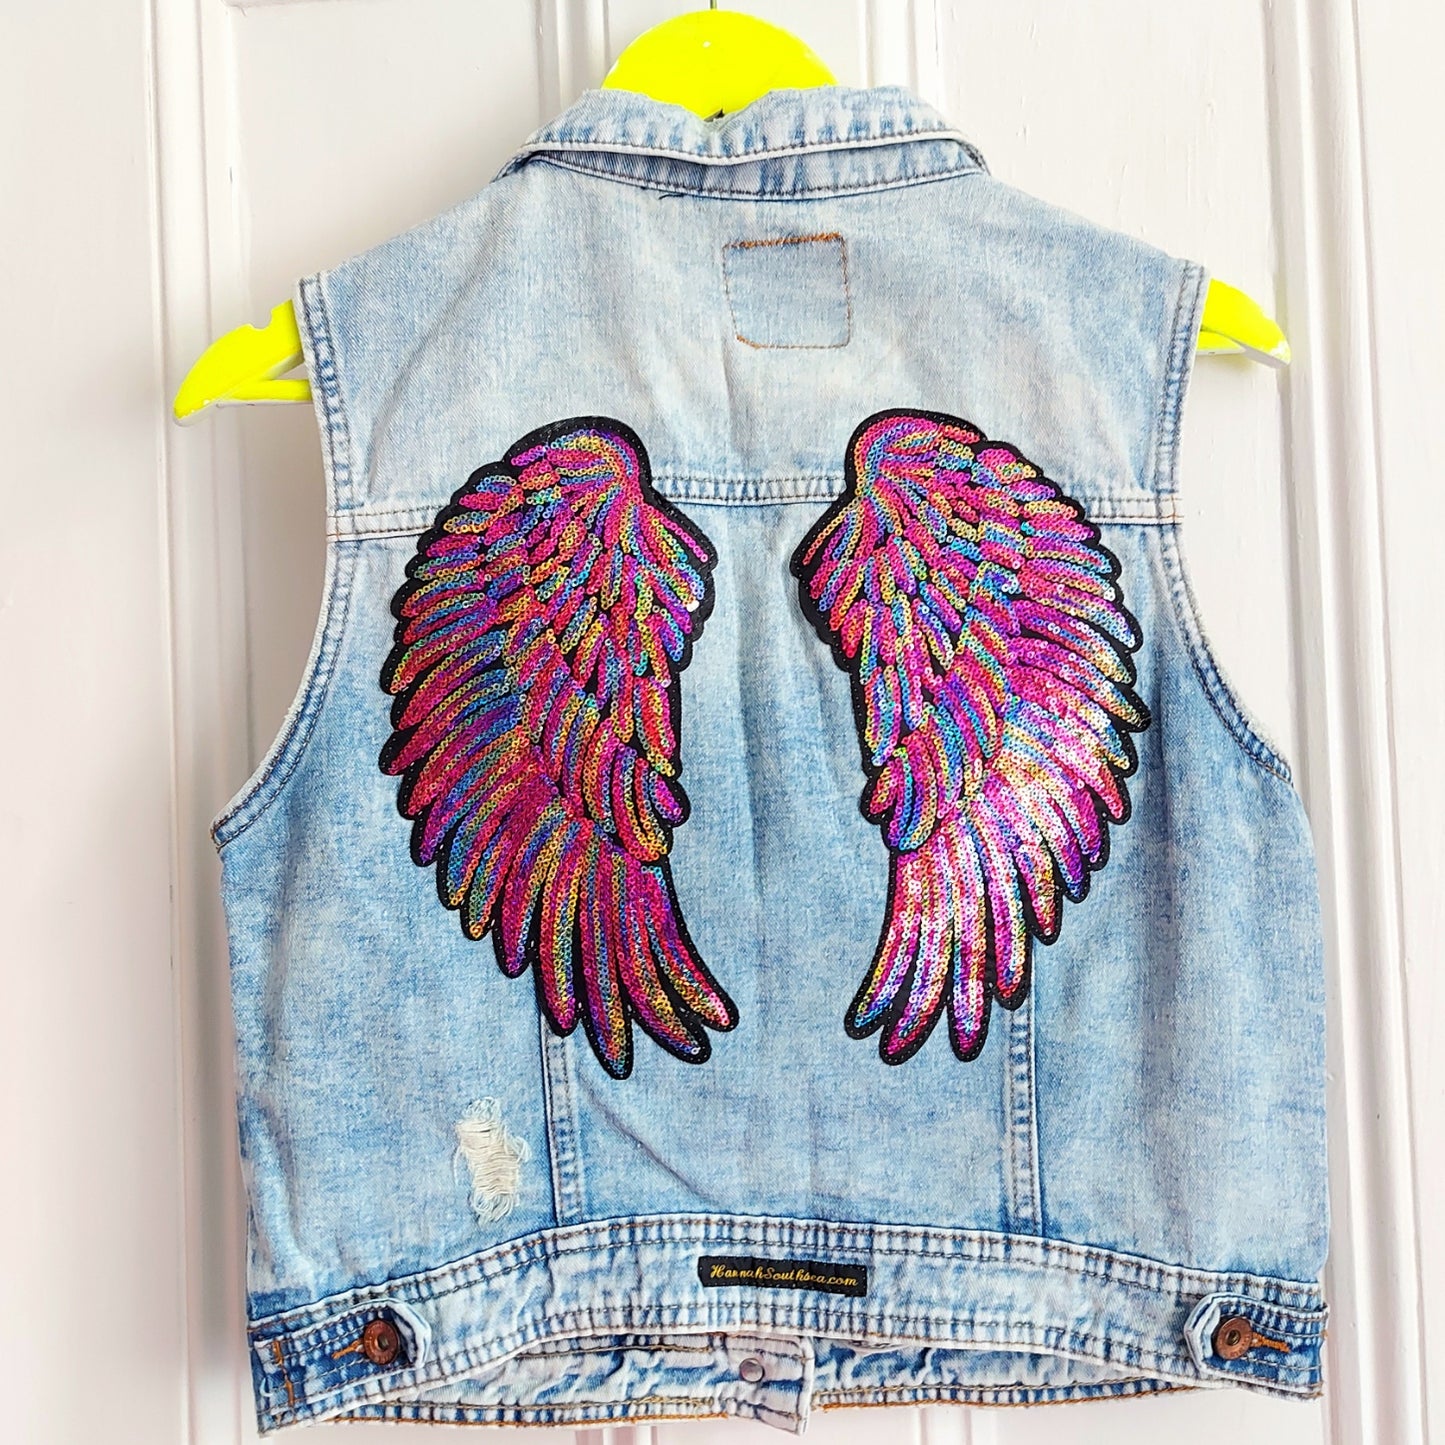 Shimmer Rainbow Wings - 2 Piece